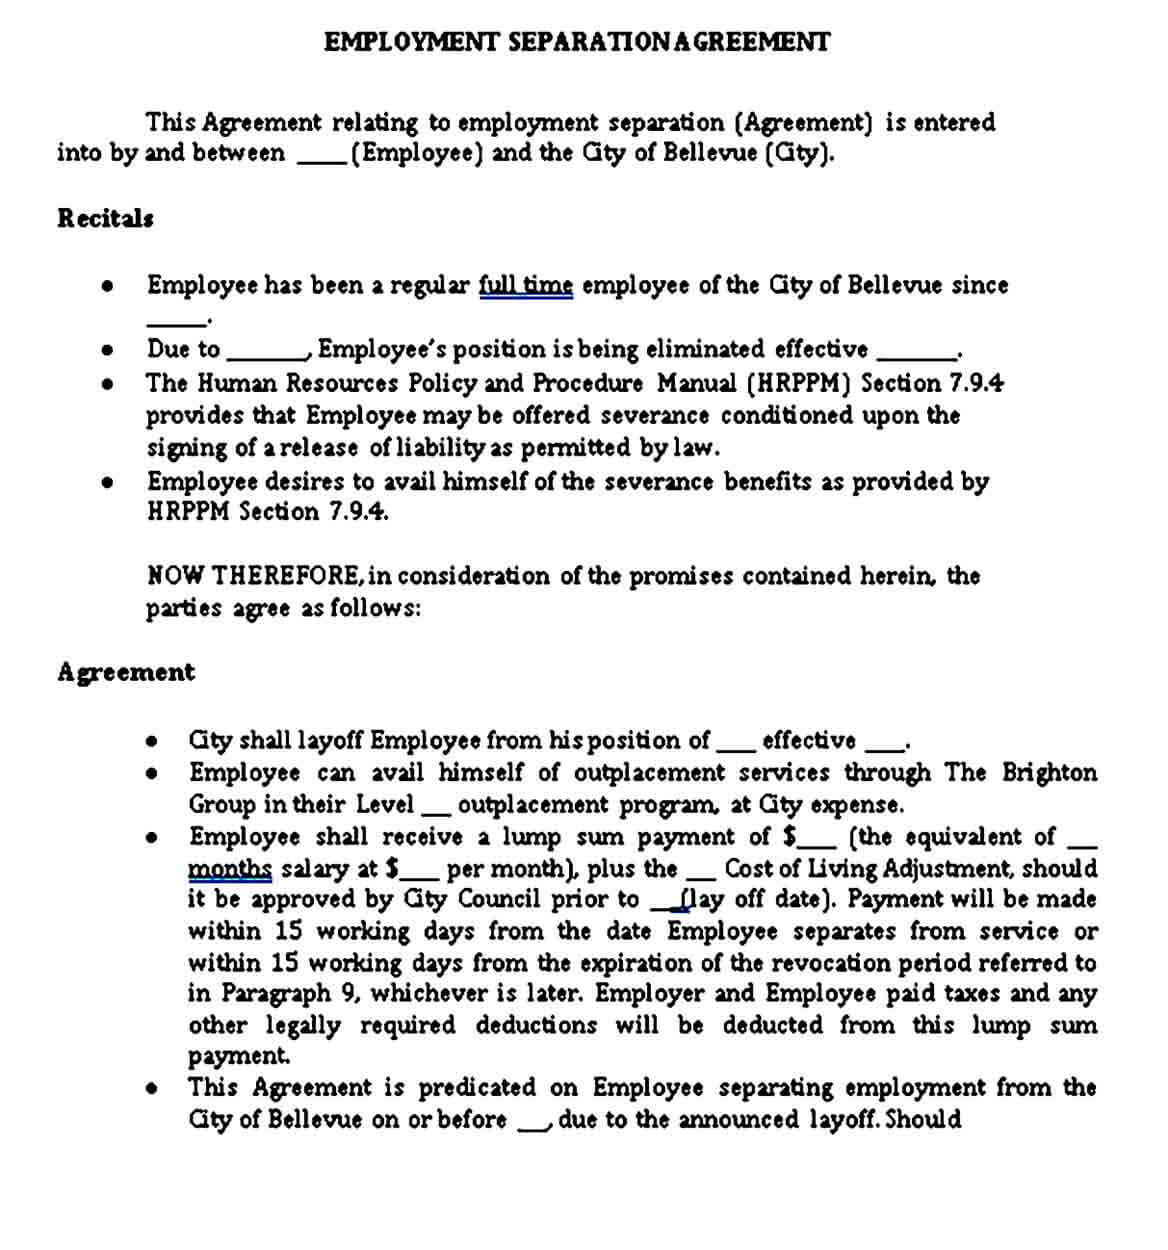 Sample Employment Separation Agreement in PDF